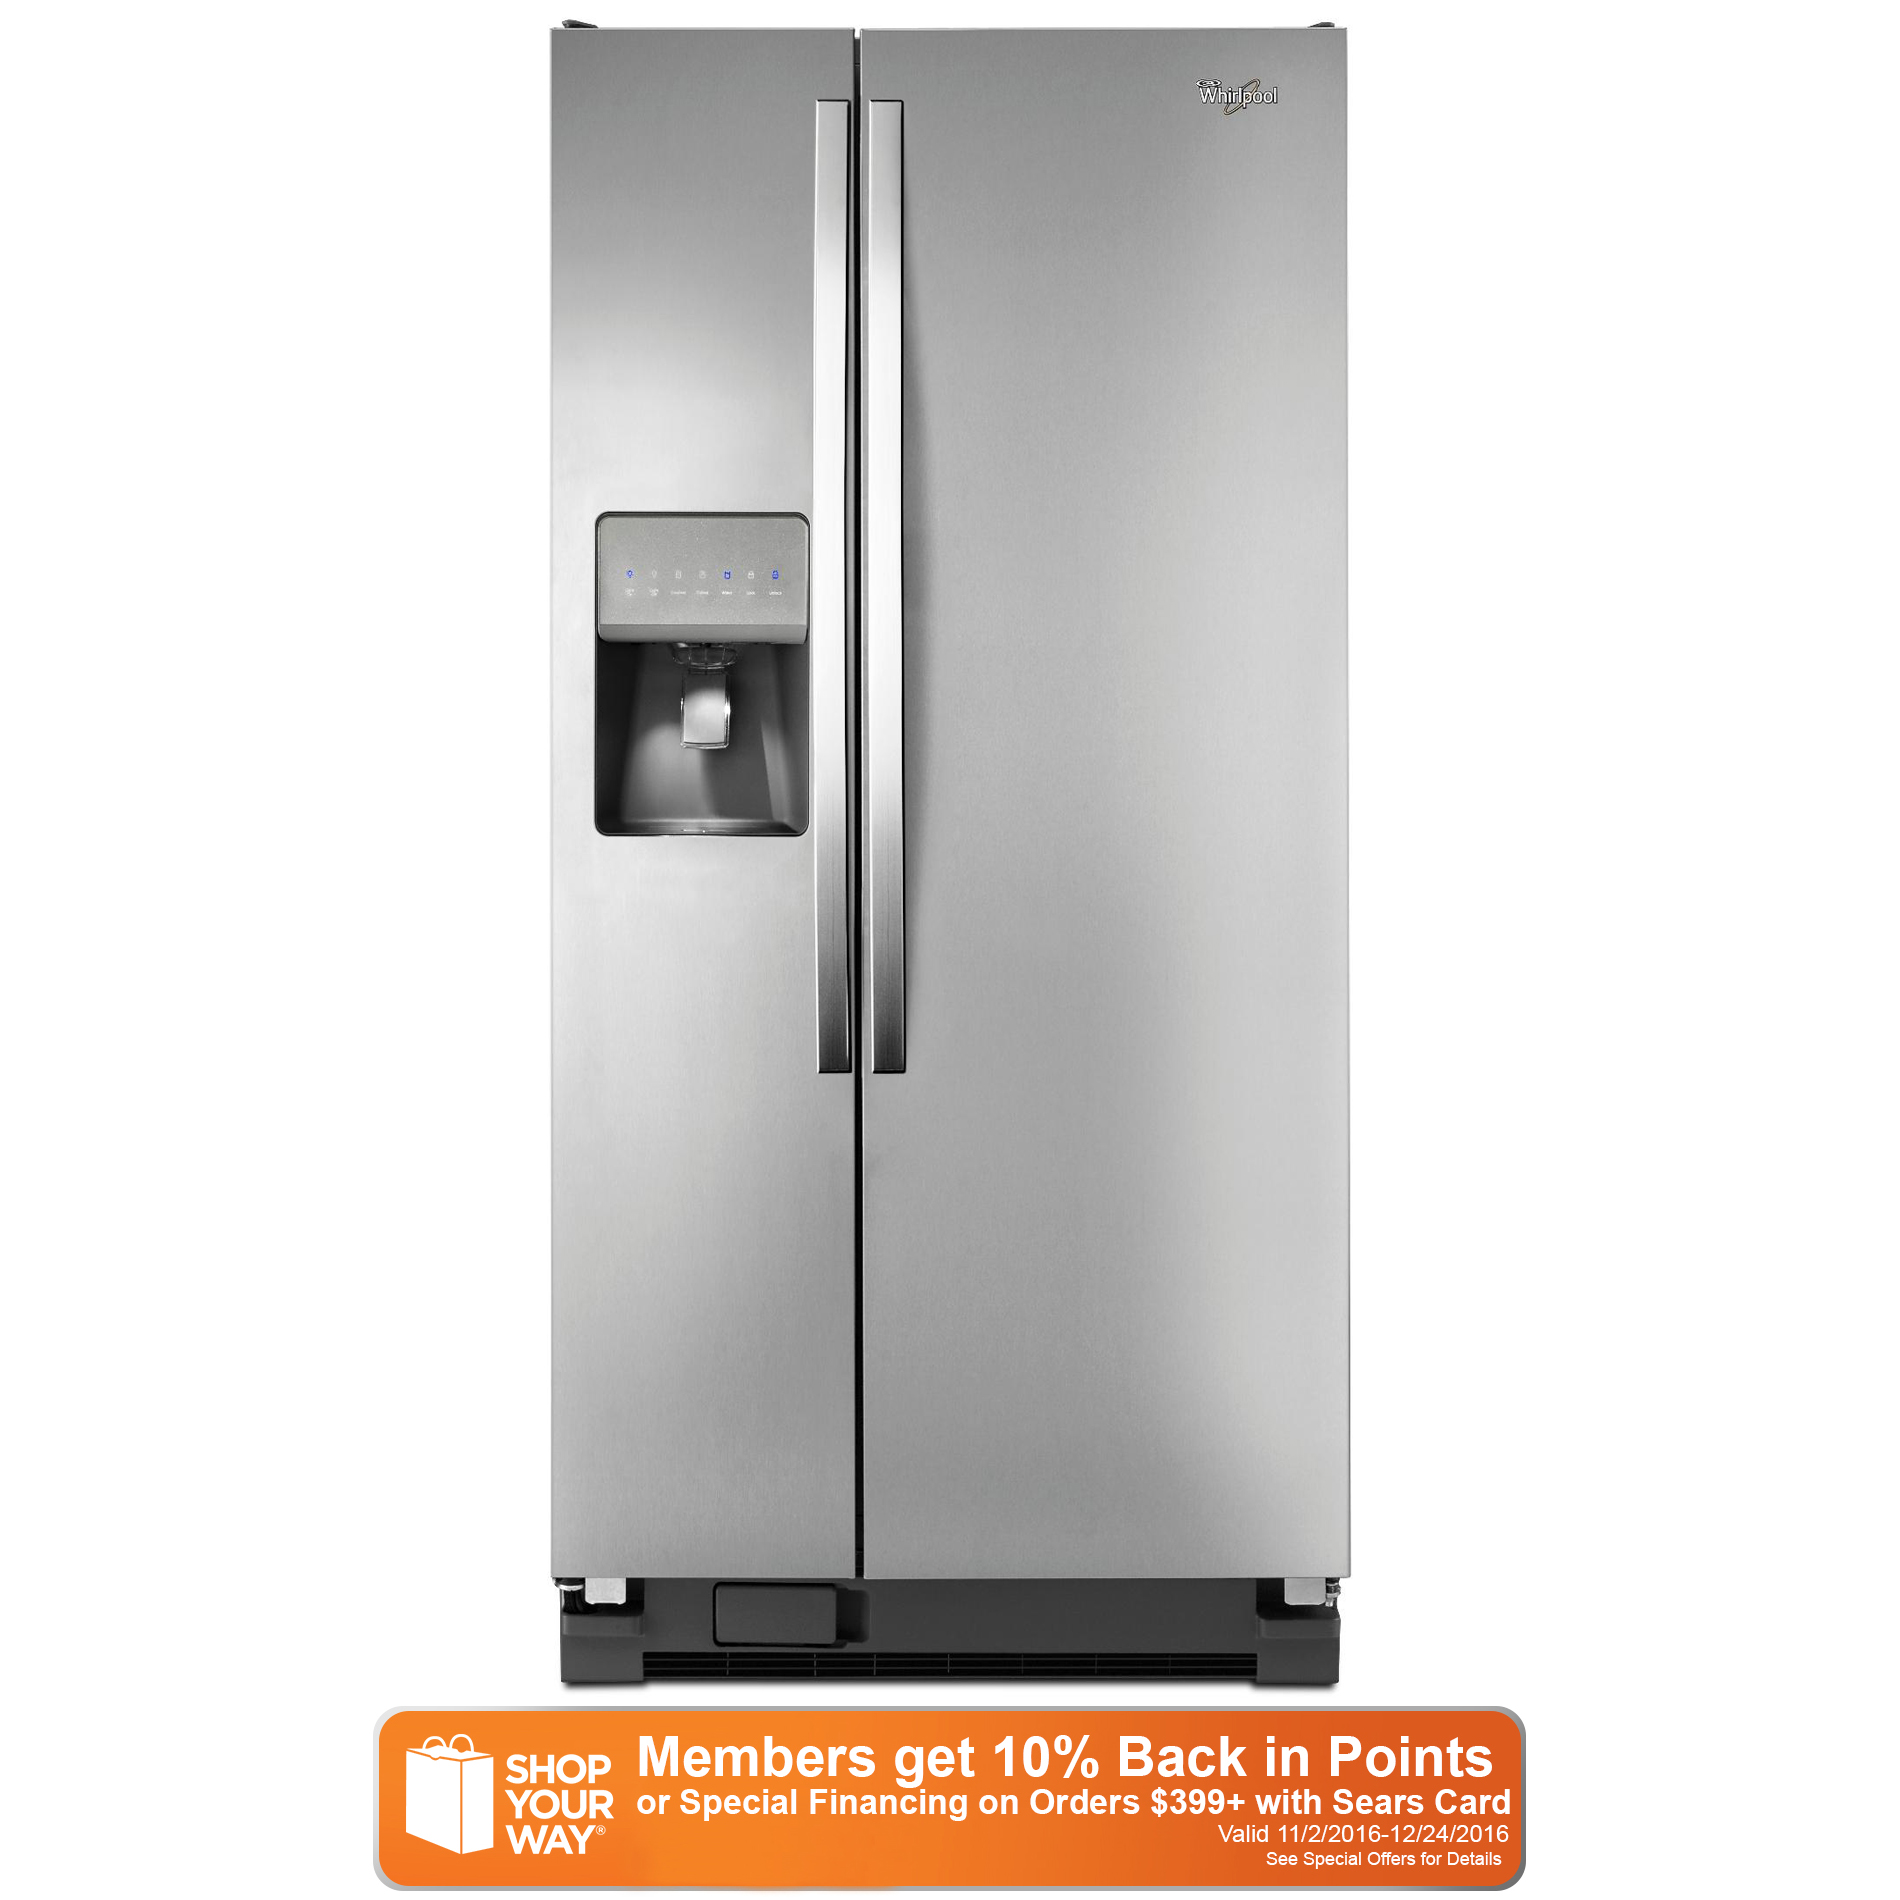 0883049272405 - WRS322FDAM 21 CU. FT. SIDE-BY-SIDE REFRIGERATOR W/ ACCU-CHILL&TRADE; - STAINLESS STEEL